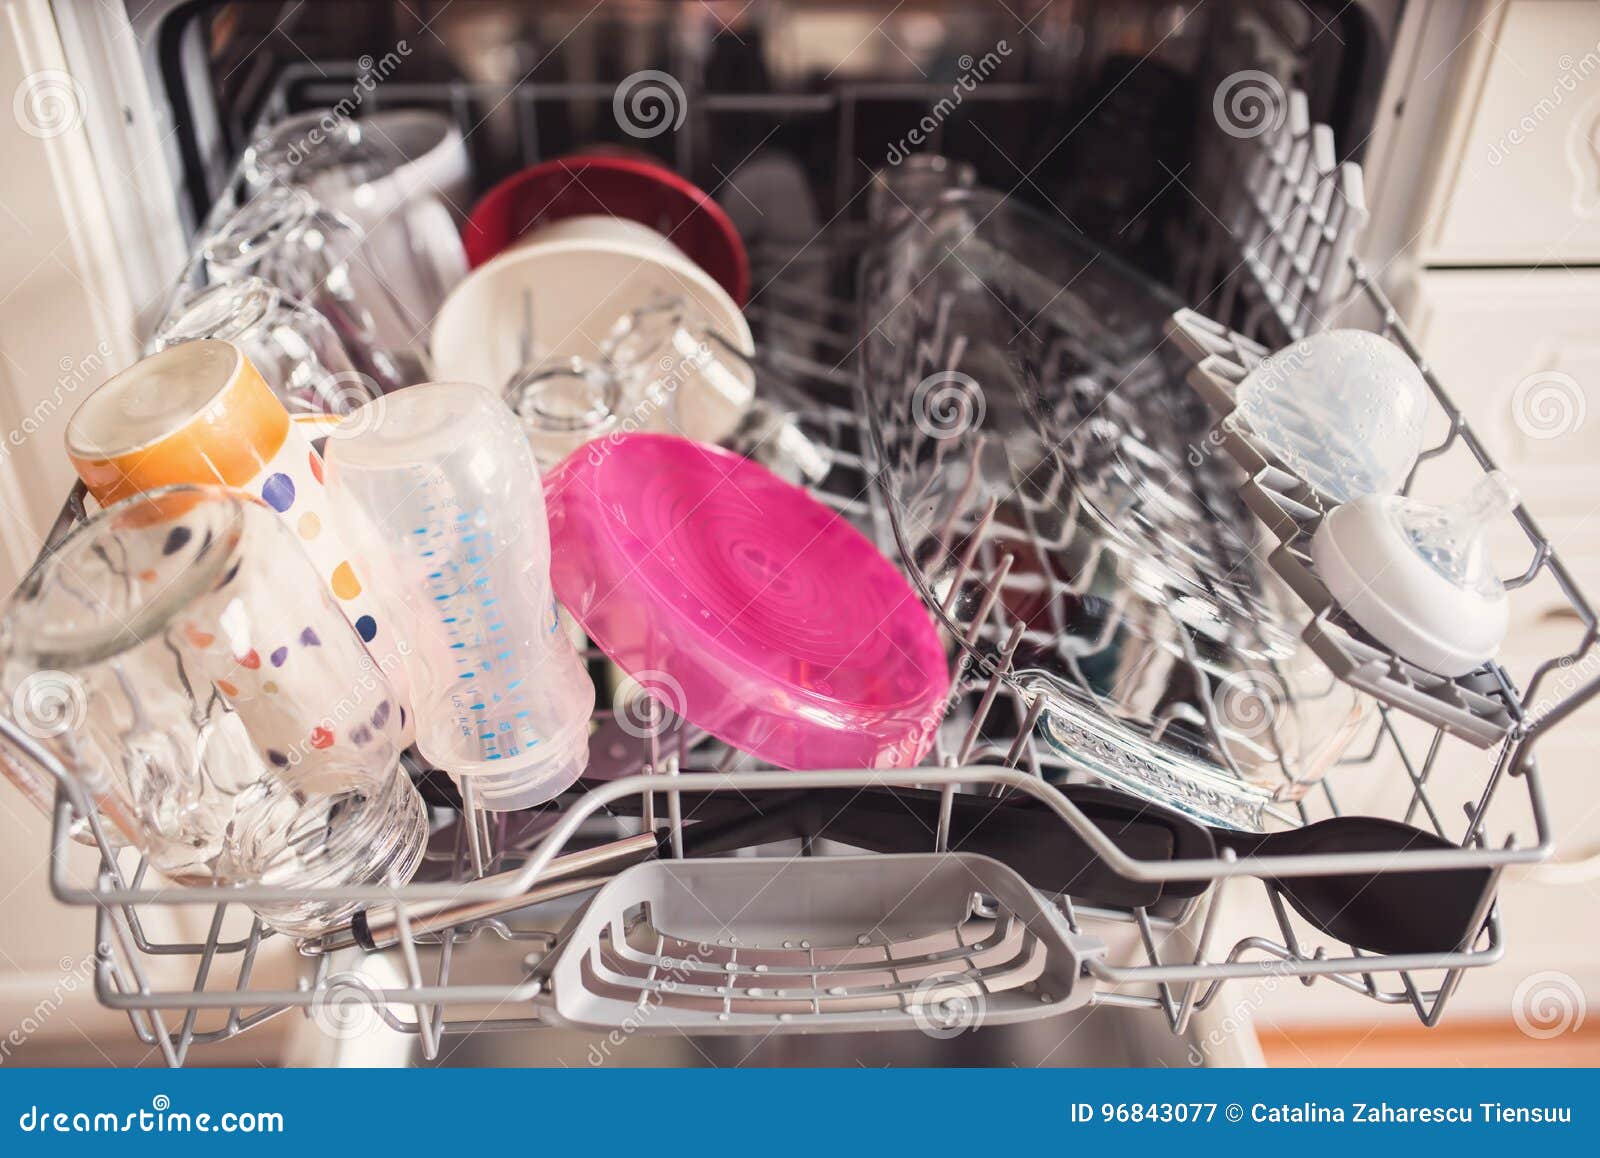 Can You Wash Baby Bottles In Dishwasher With Other Dishes Cheap Online